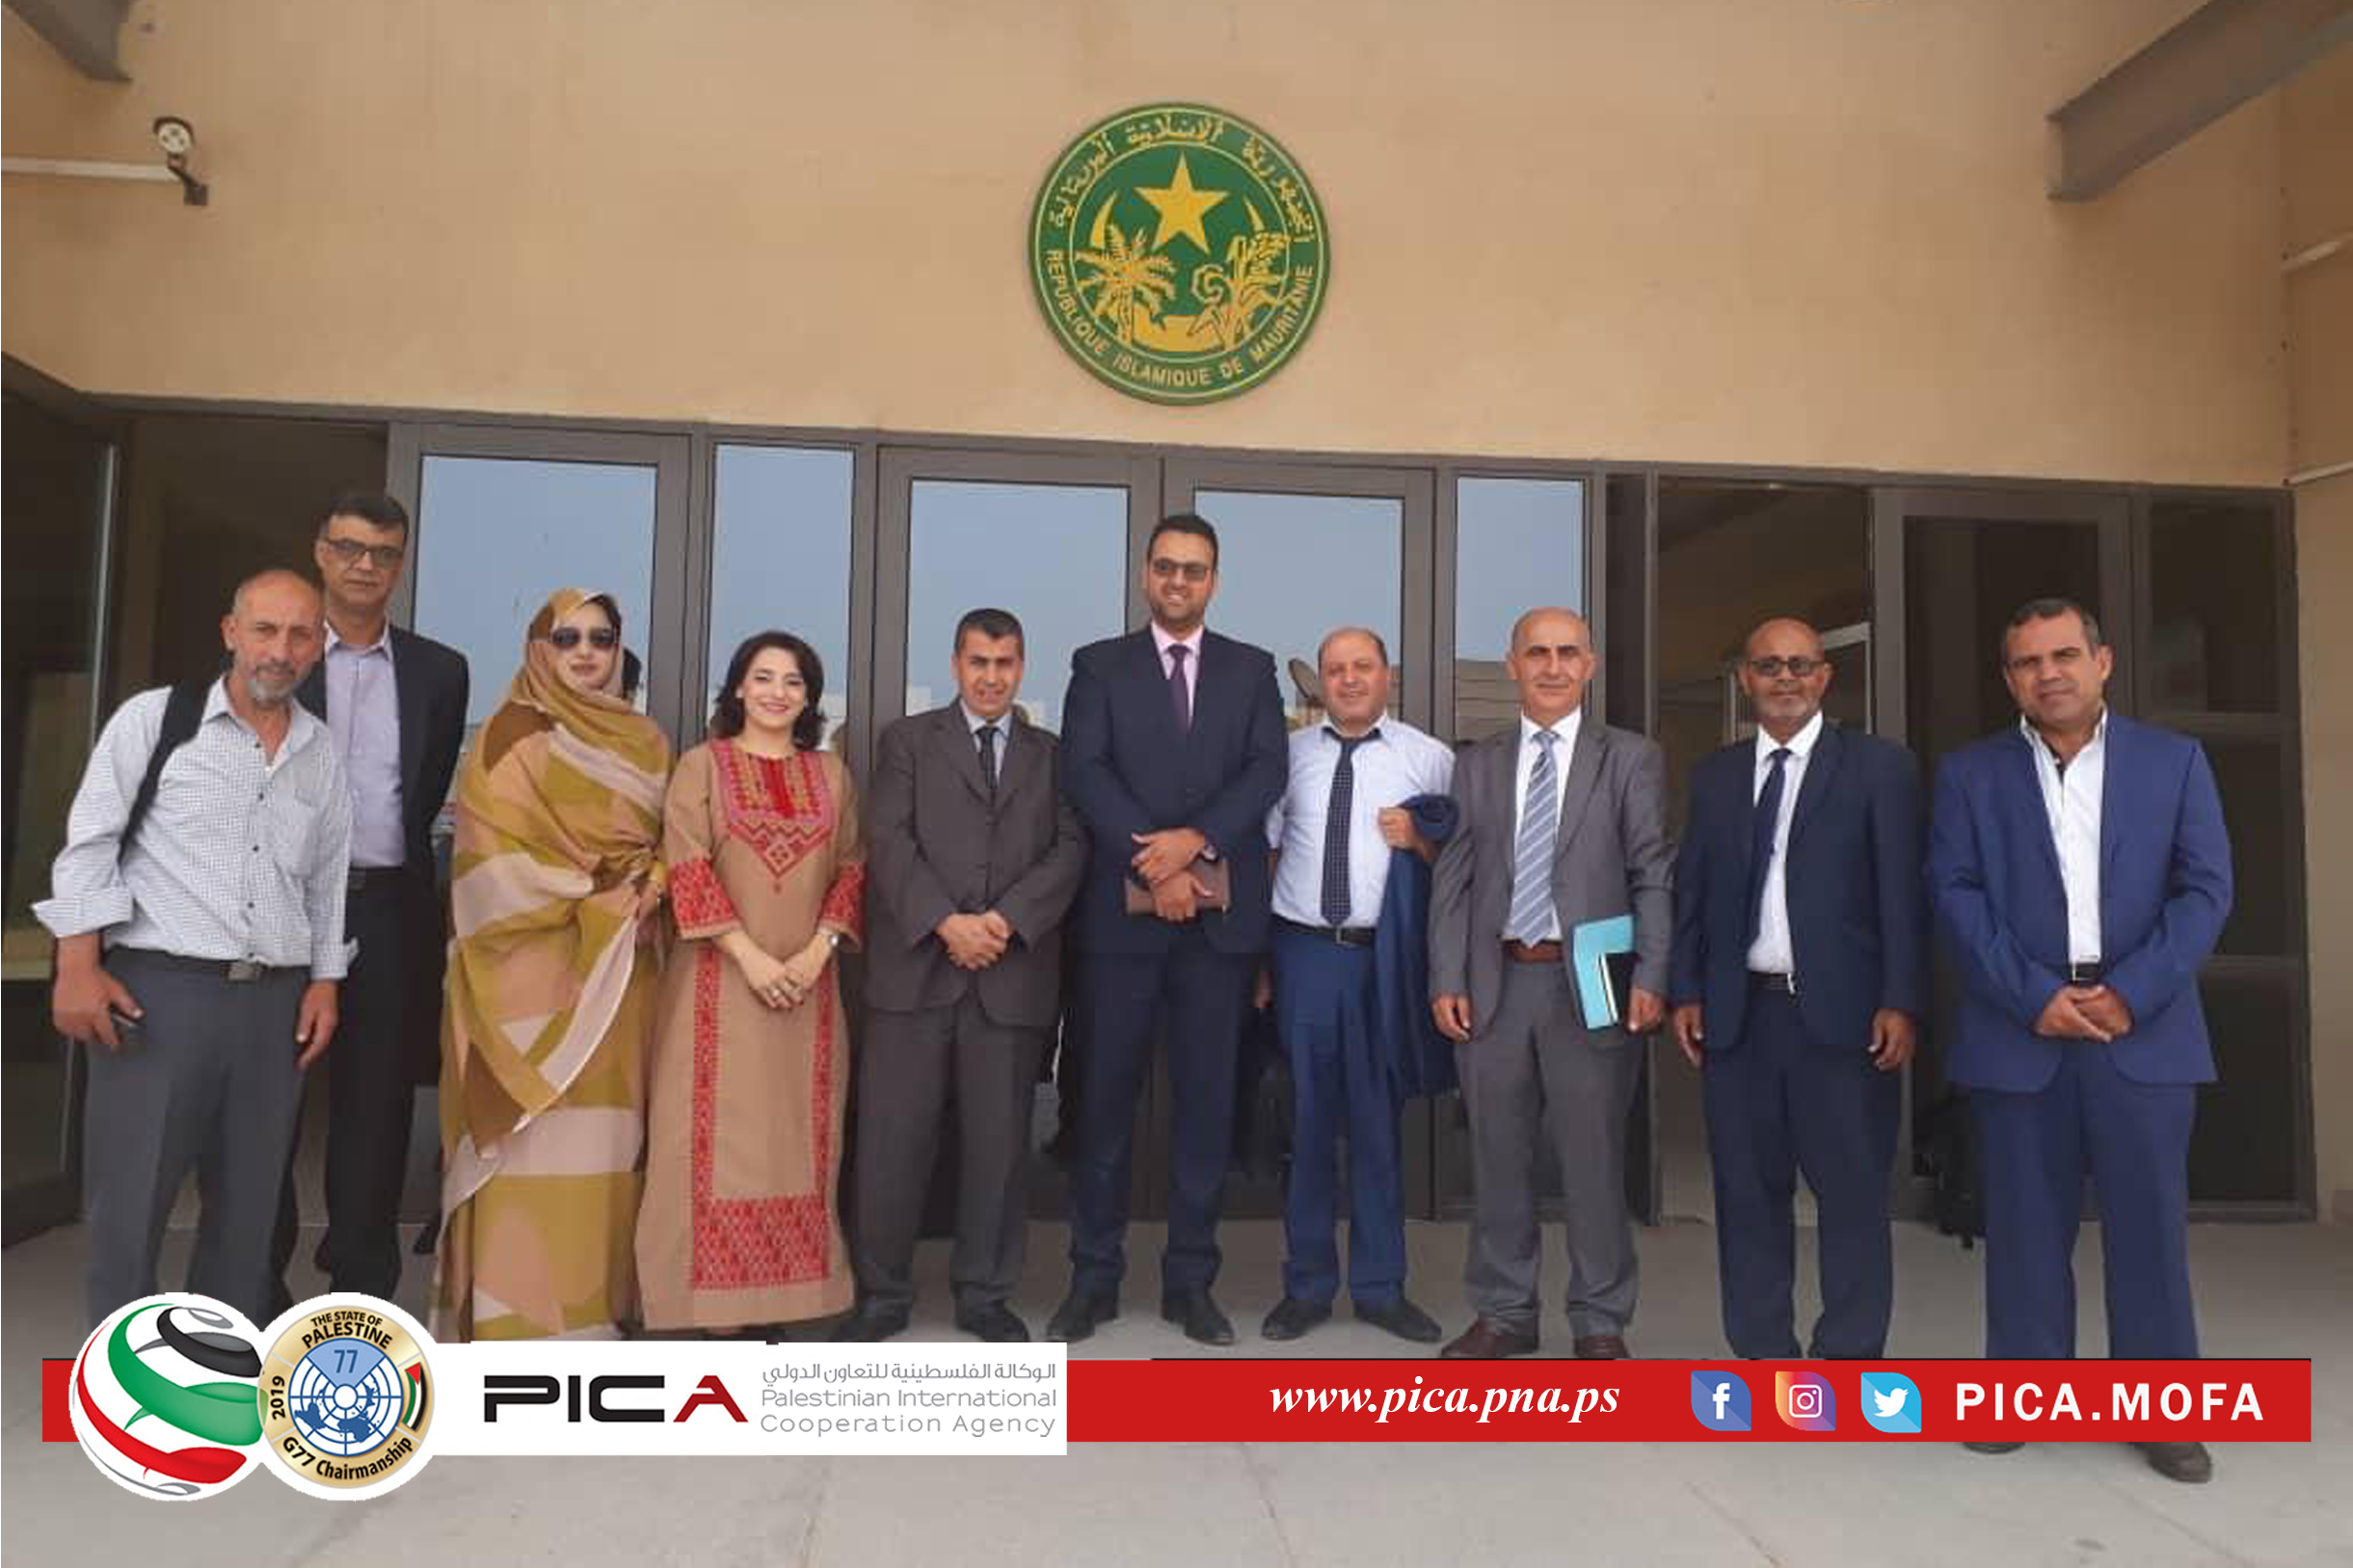 In line with PICA’s vision to enhance South-South cooperation, Palestine and Mauritania are partners in agricultural development program supported by the Islamic Development Bank